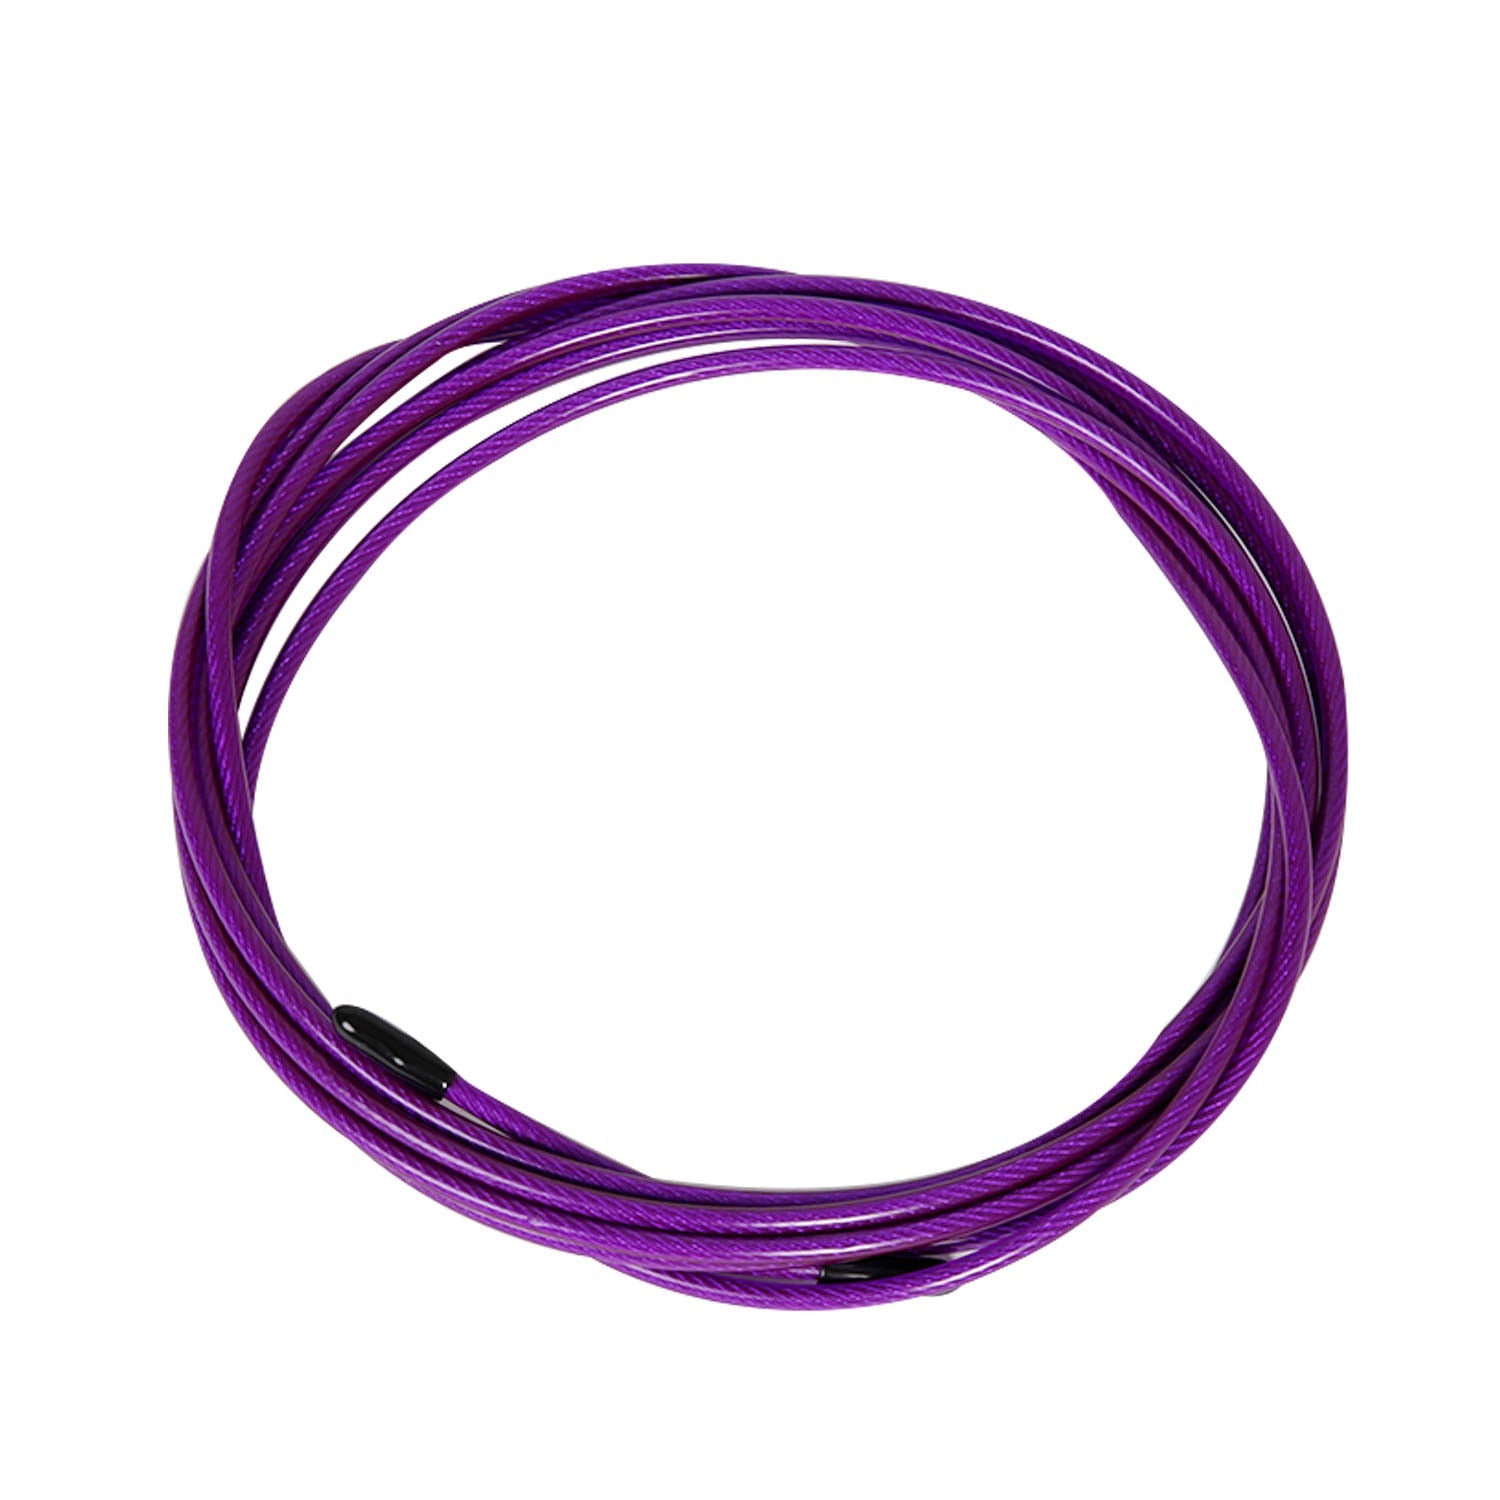 GND SR Skipping Rope Replacement Rope // Purple 3.4mm - SR Skipping Rope- GND Fitness